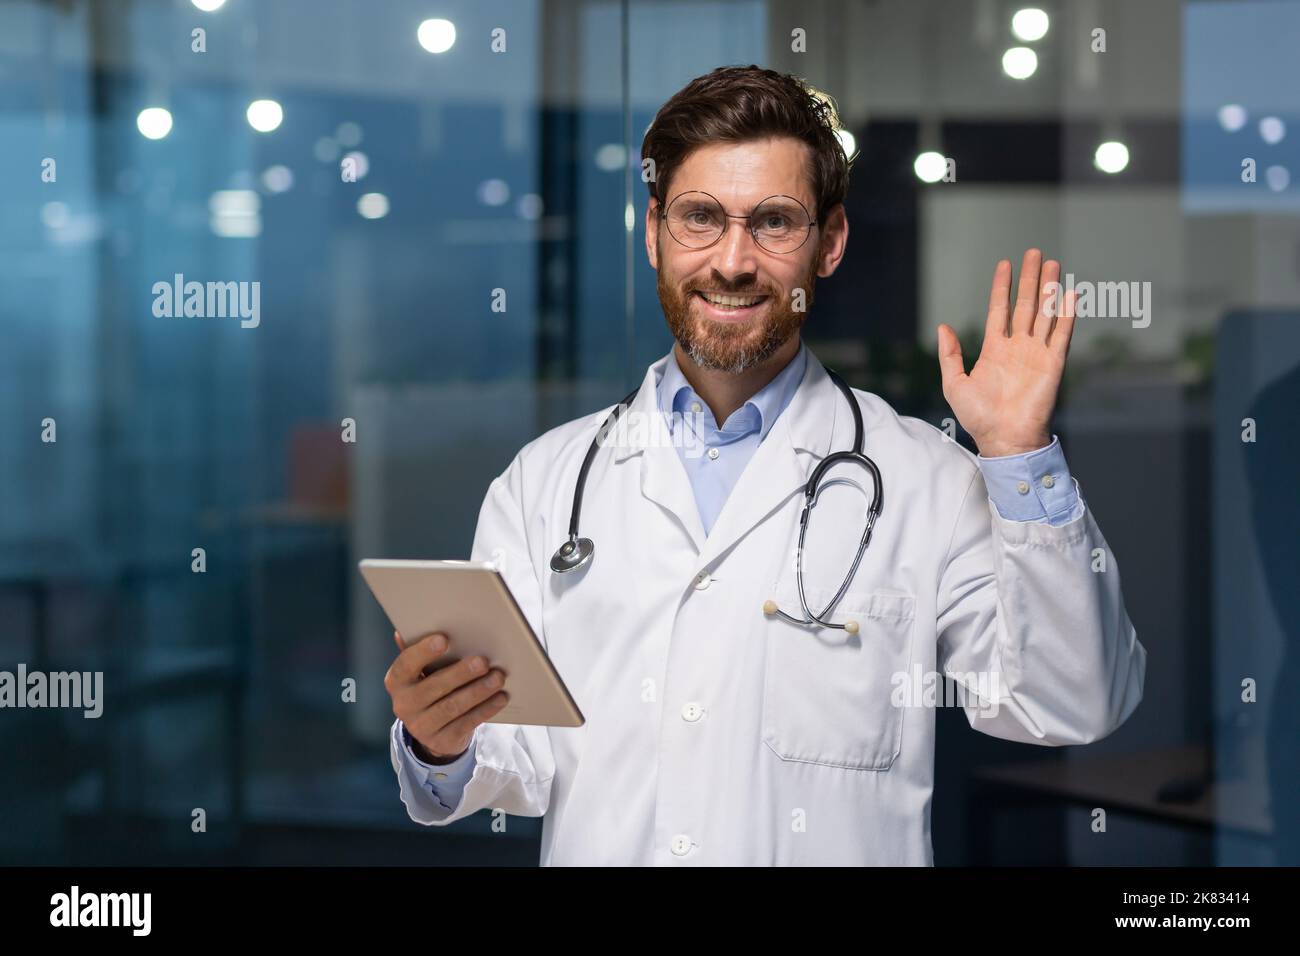 Senior mature doctor with tablet looking at camera and holding hand up greeting gesture, man in white medical coat working inside modern clinic, using tablet computer at work. Stock Photo